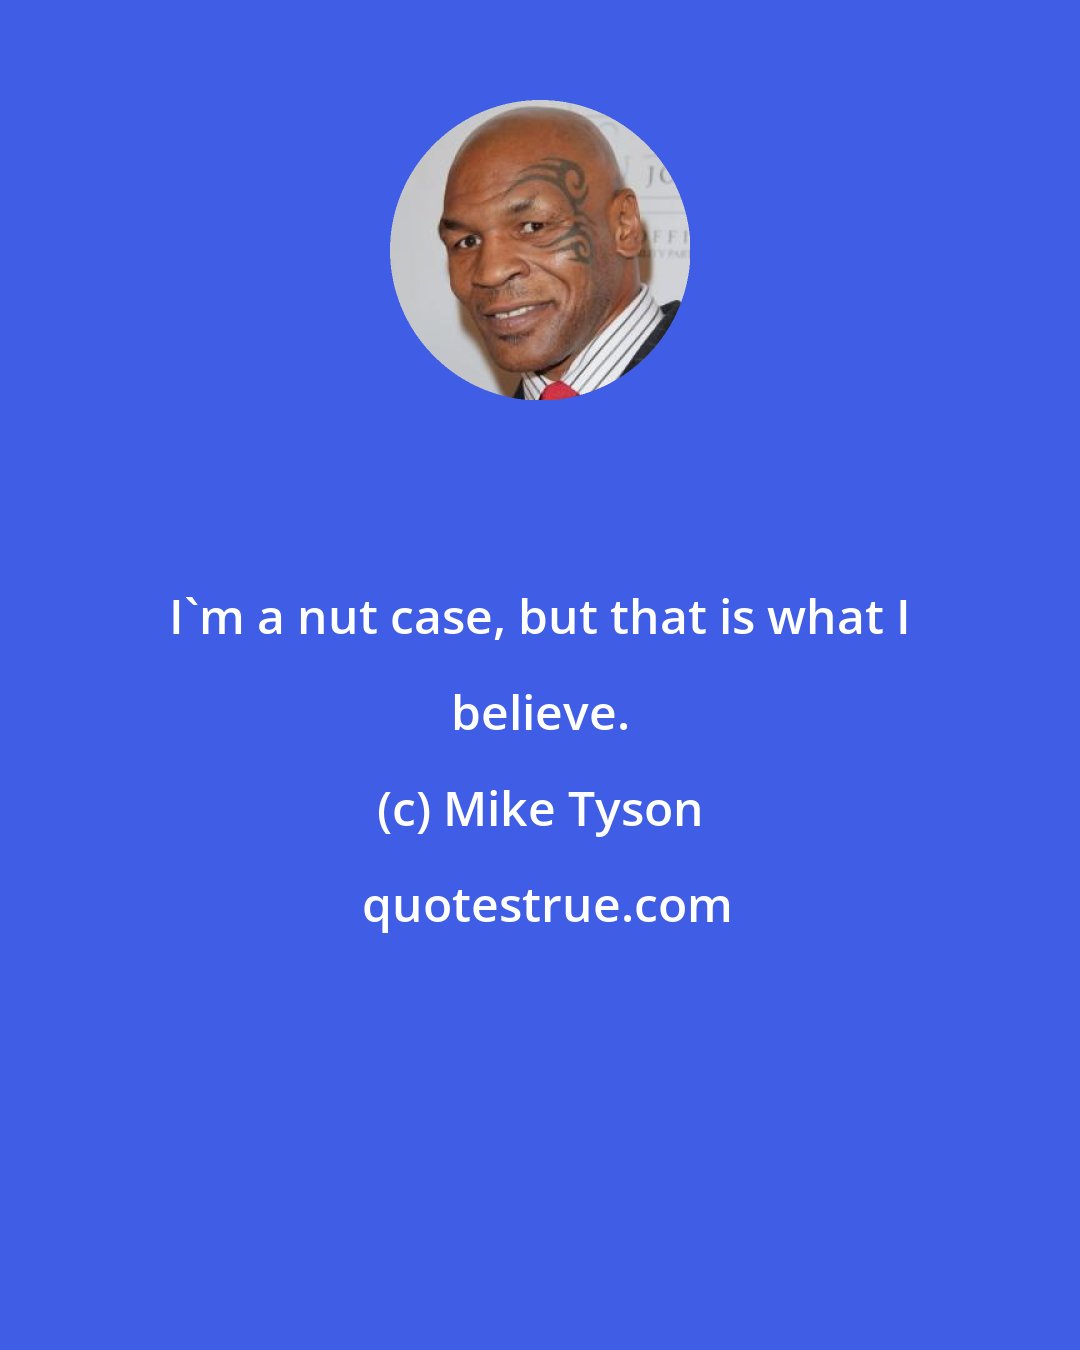 Mike Tyson: I'm a nut case, but that is what I believe.